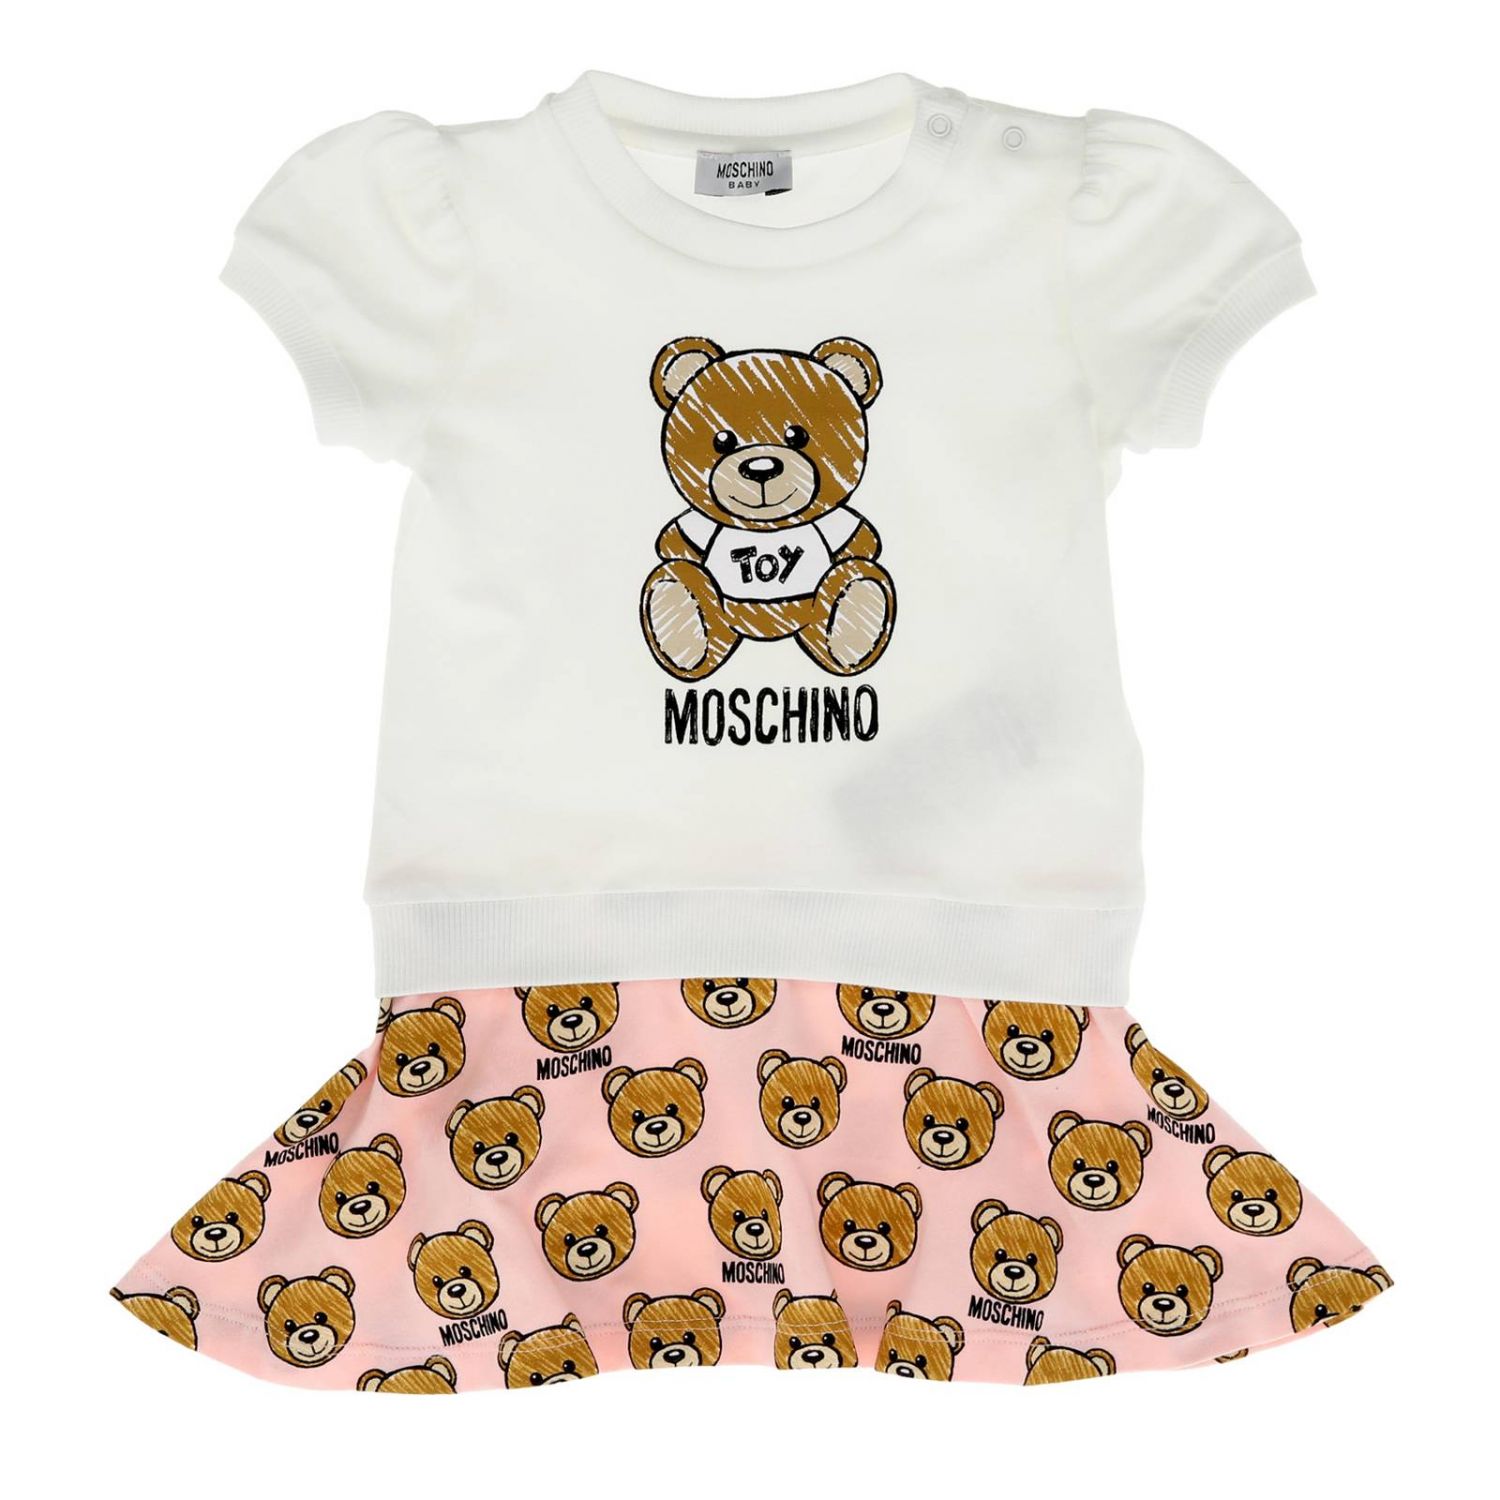 Moschino Baby Outlet: dress for girls - Pink | Moschino Baby dress ...